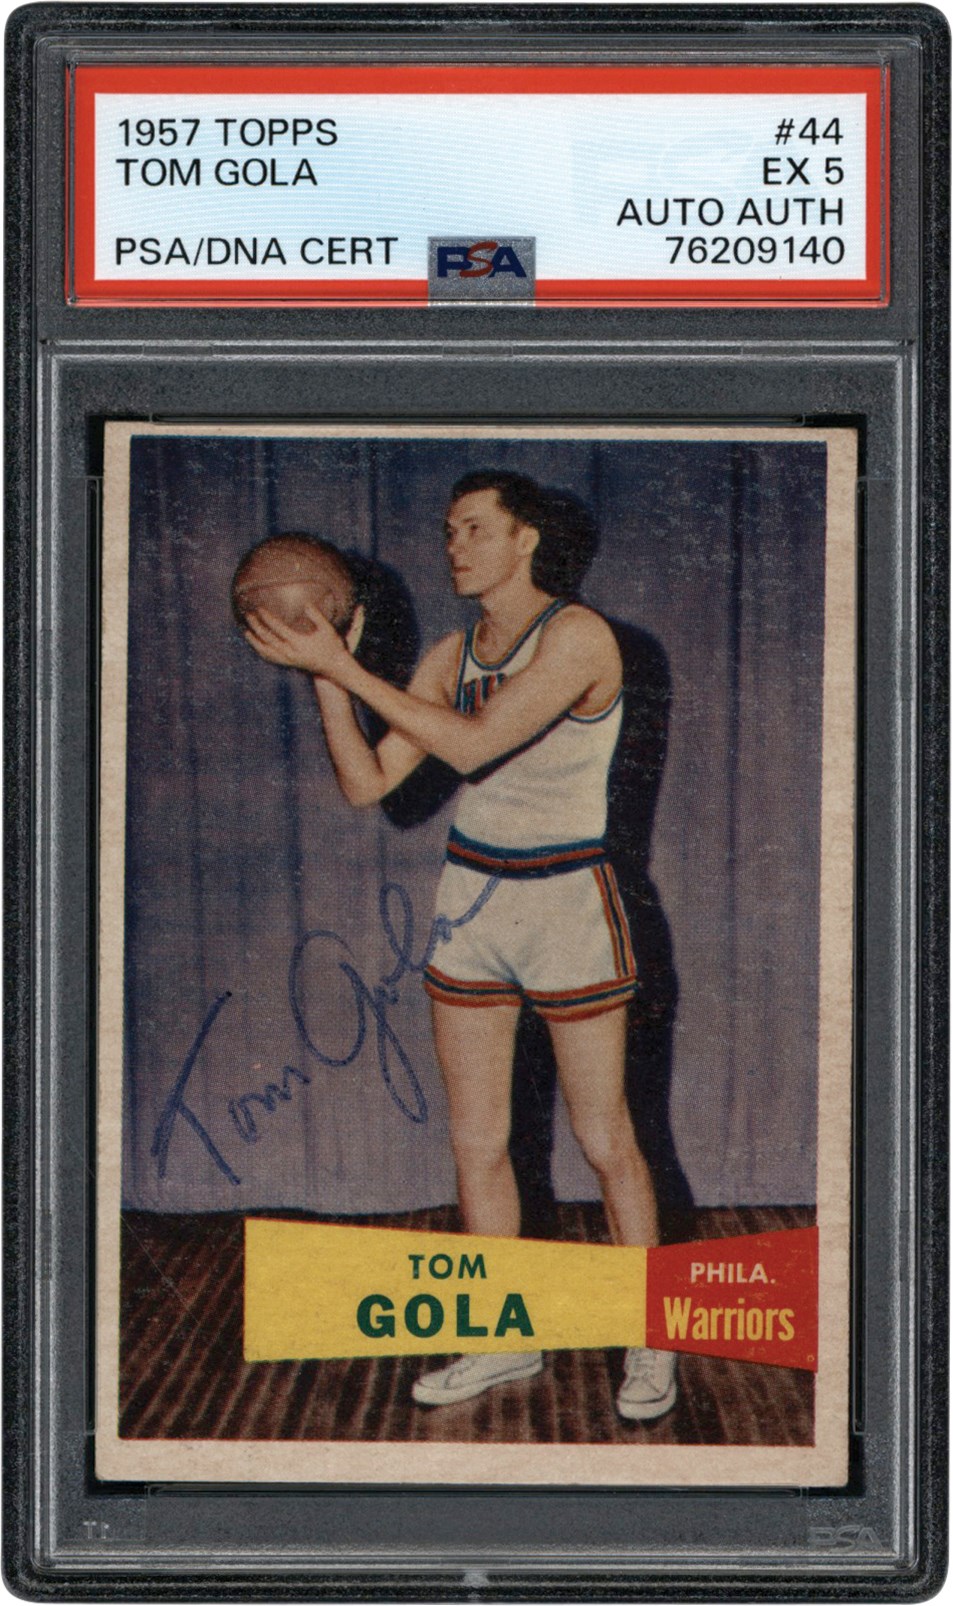 1957 Topps Basketball #44 Tom Gola Signed Rookie Card PSA EX 5 Auto Auth (Pop 1 One Higher)